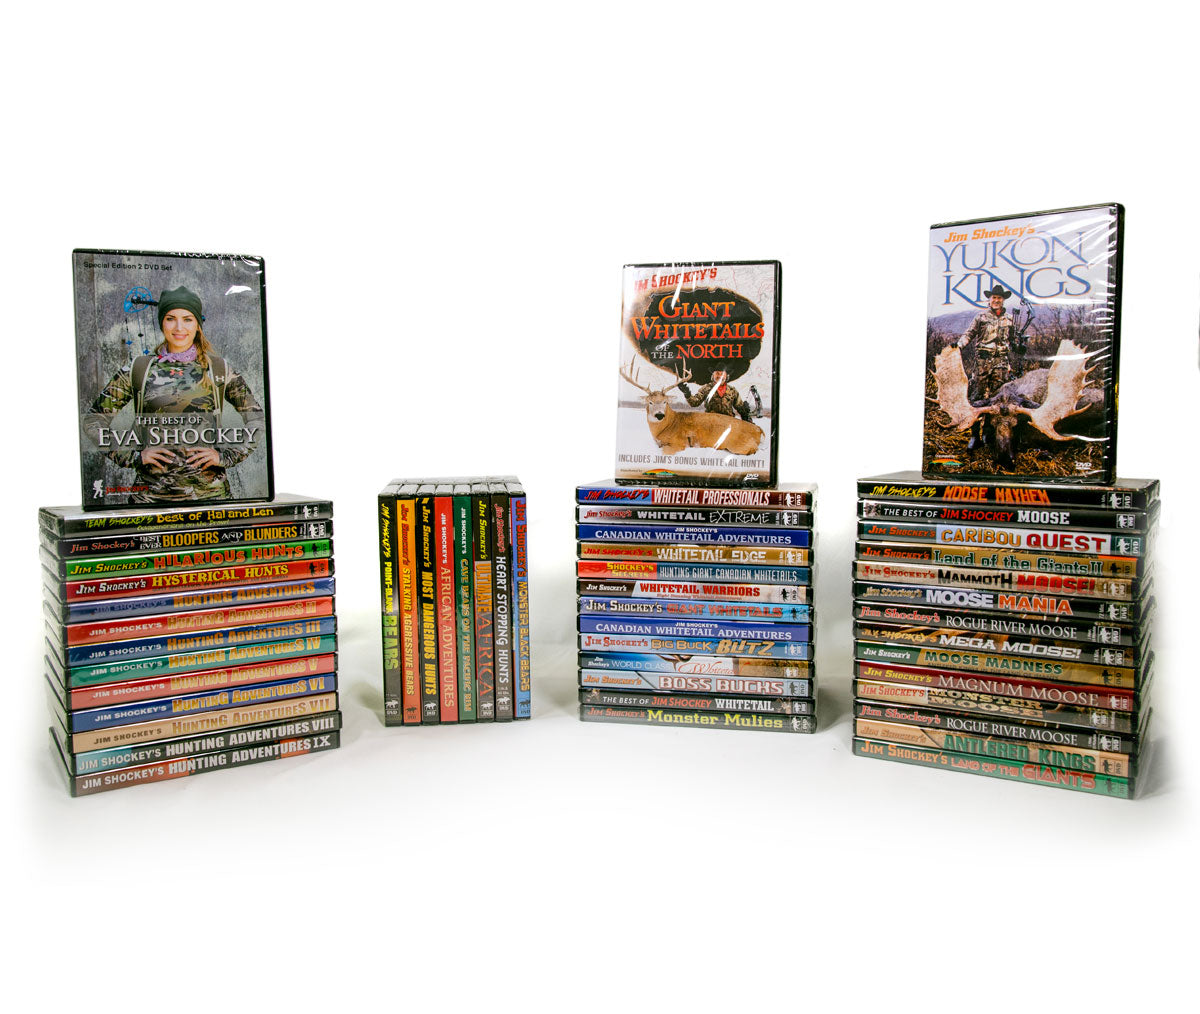 The Shockey Mega Collection 49 Dvd Box Set Over 62 Hours Of Conten Jim Shockey S Store